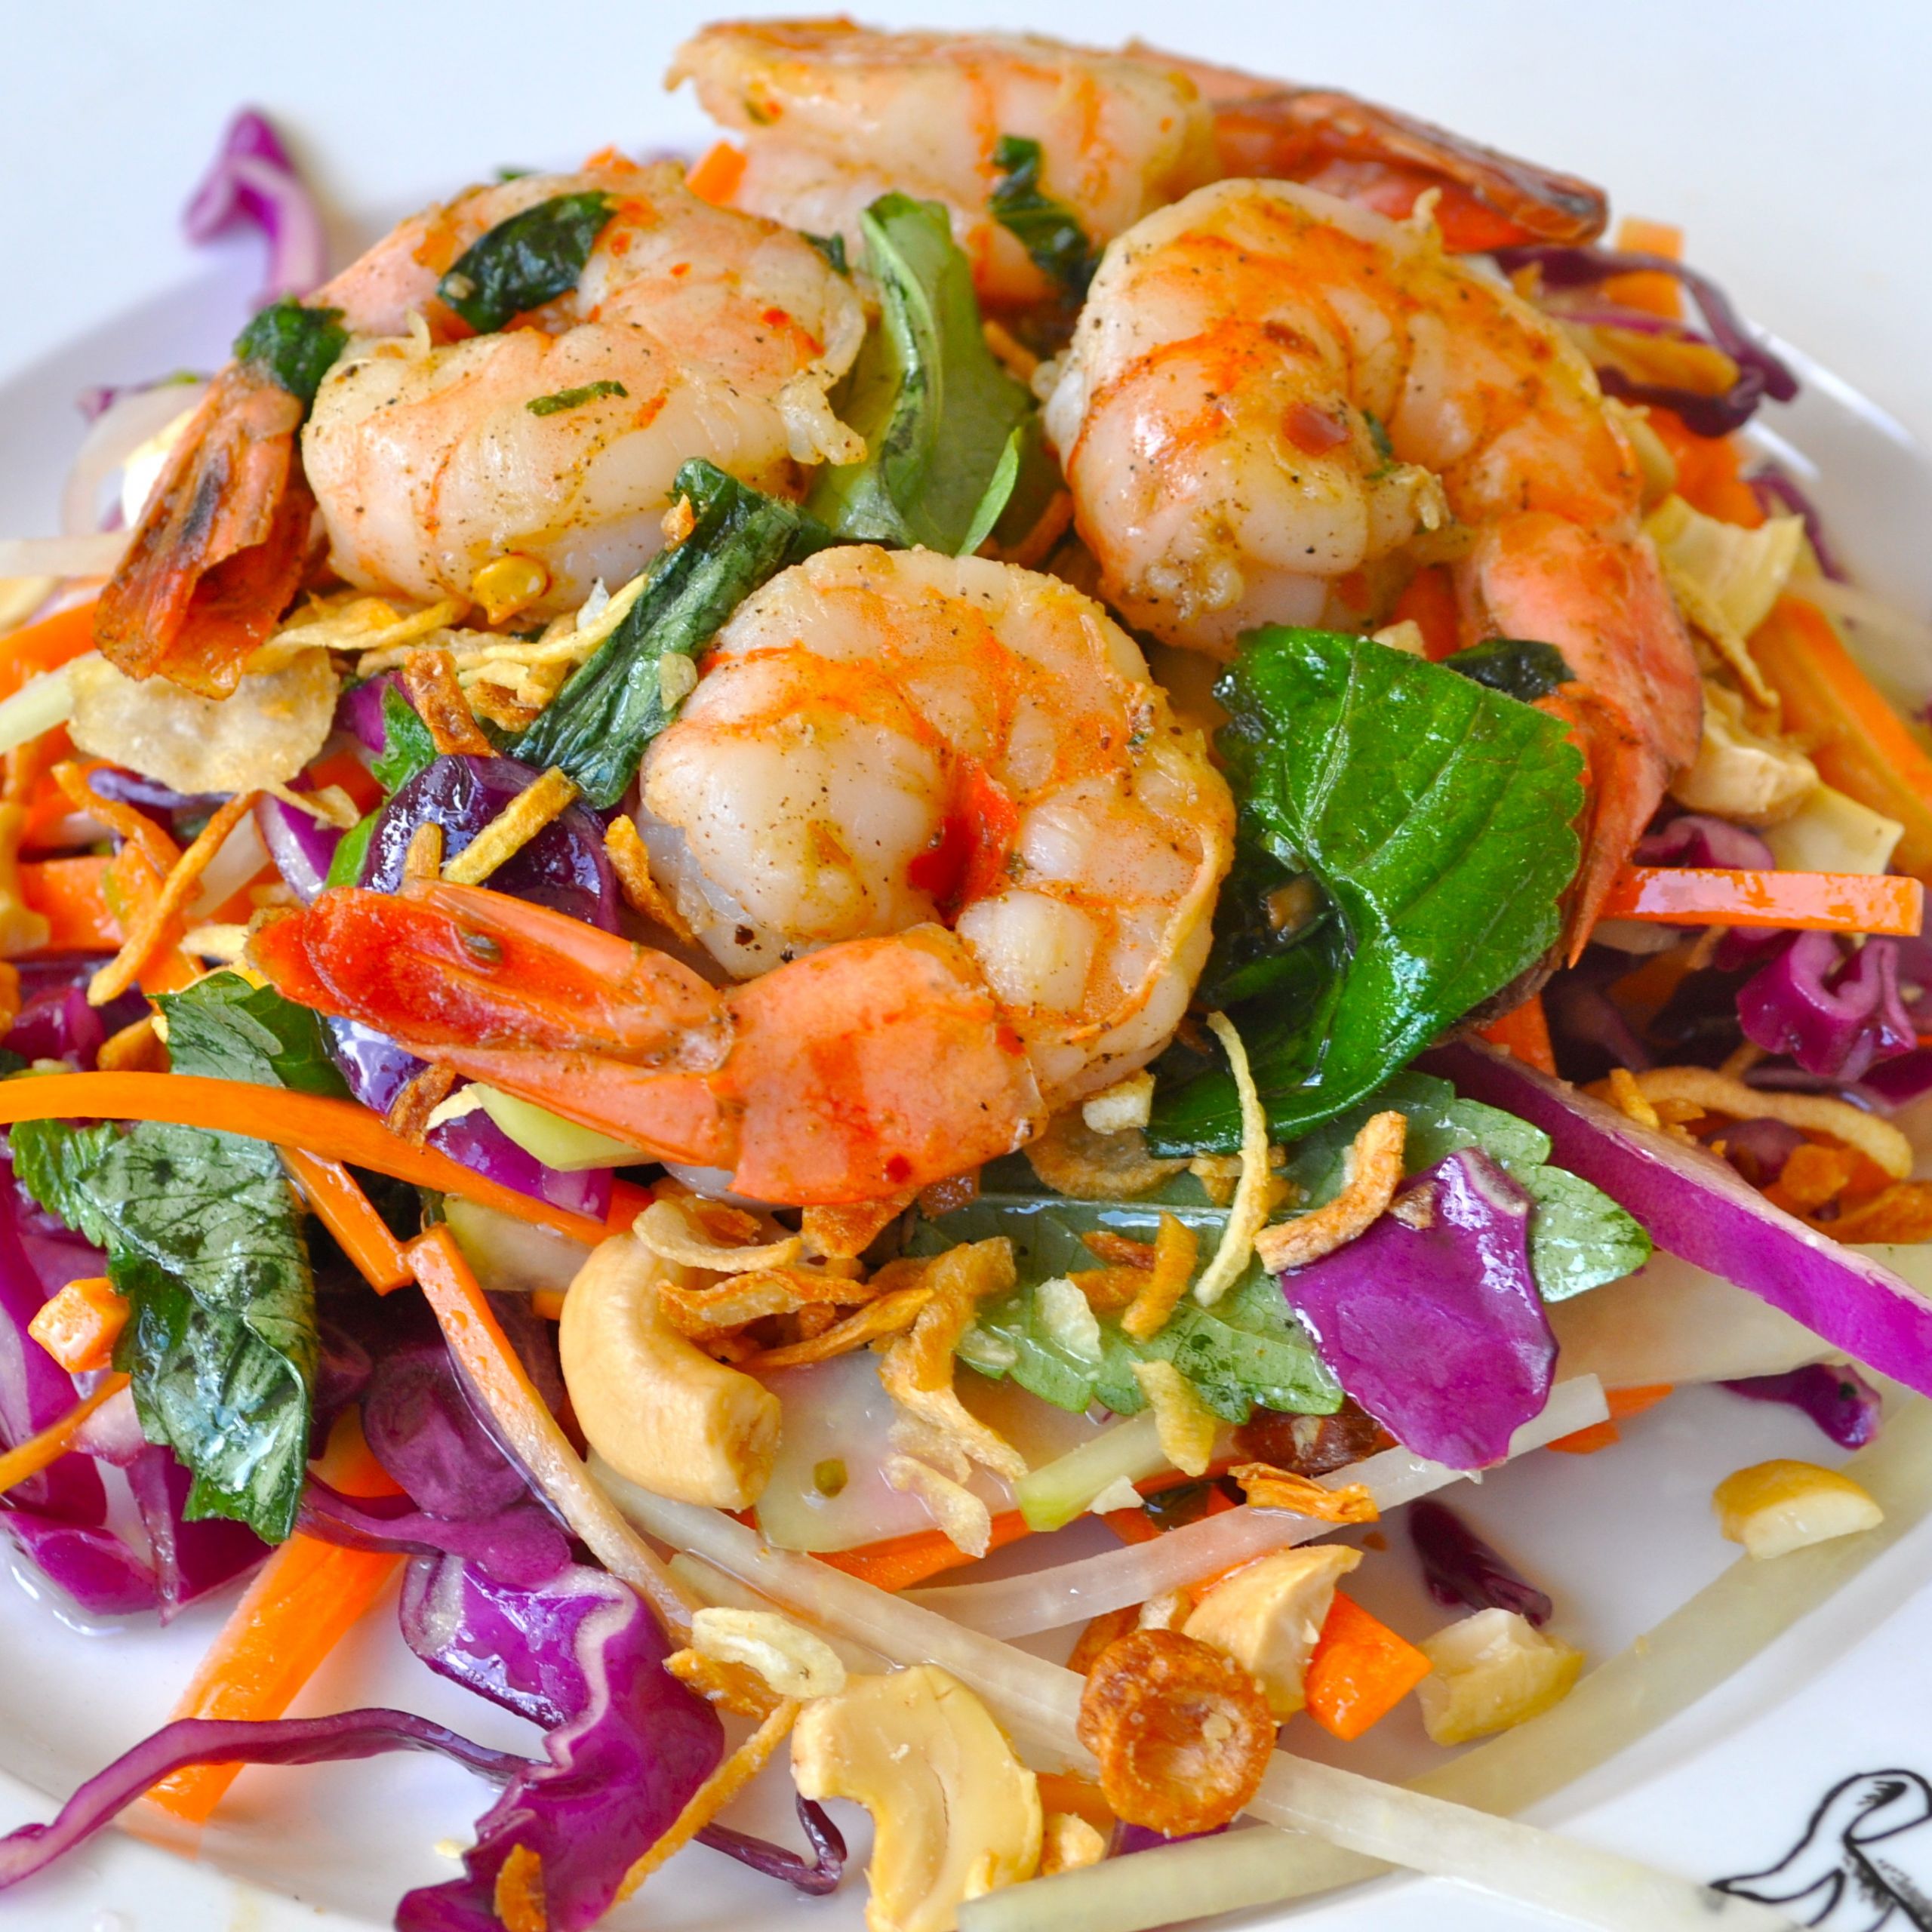 Grilled Shrimp Salad
 “You Will Want this Everyday” Vietnamese Grilled Shrimp